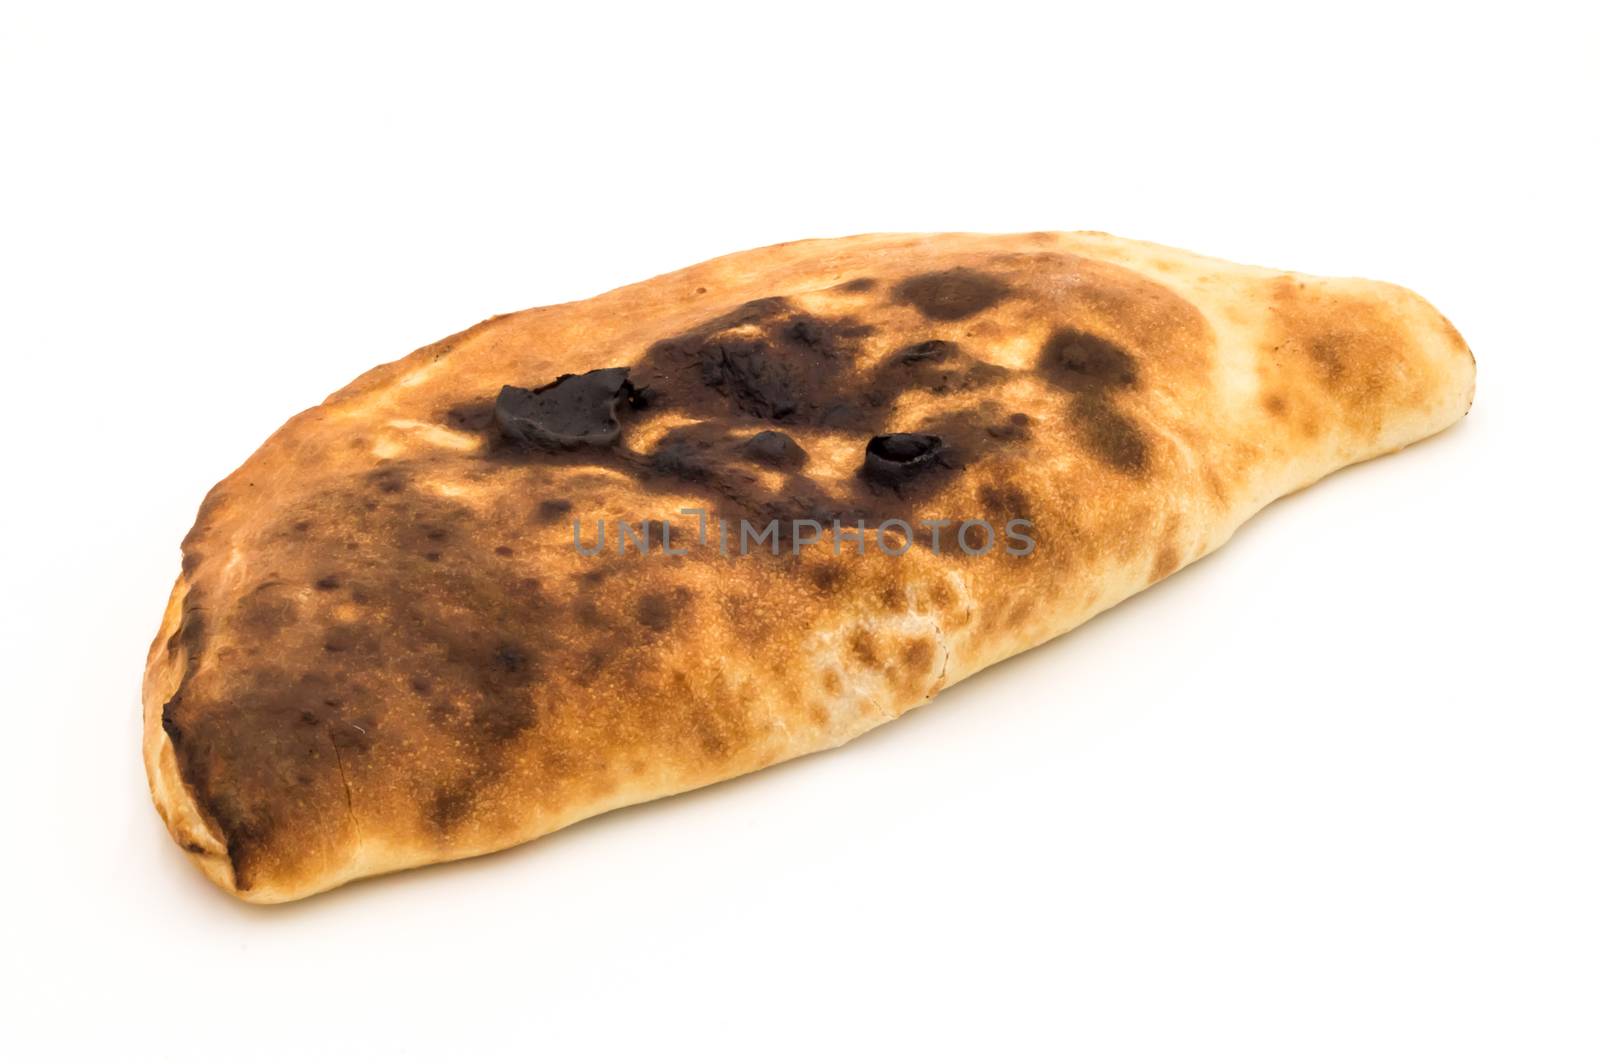 Baked in calzone - closed type of pizza which is folded in half  by Philou1000